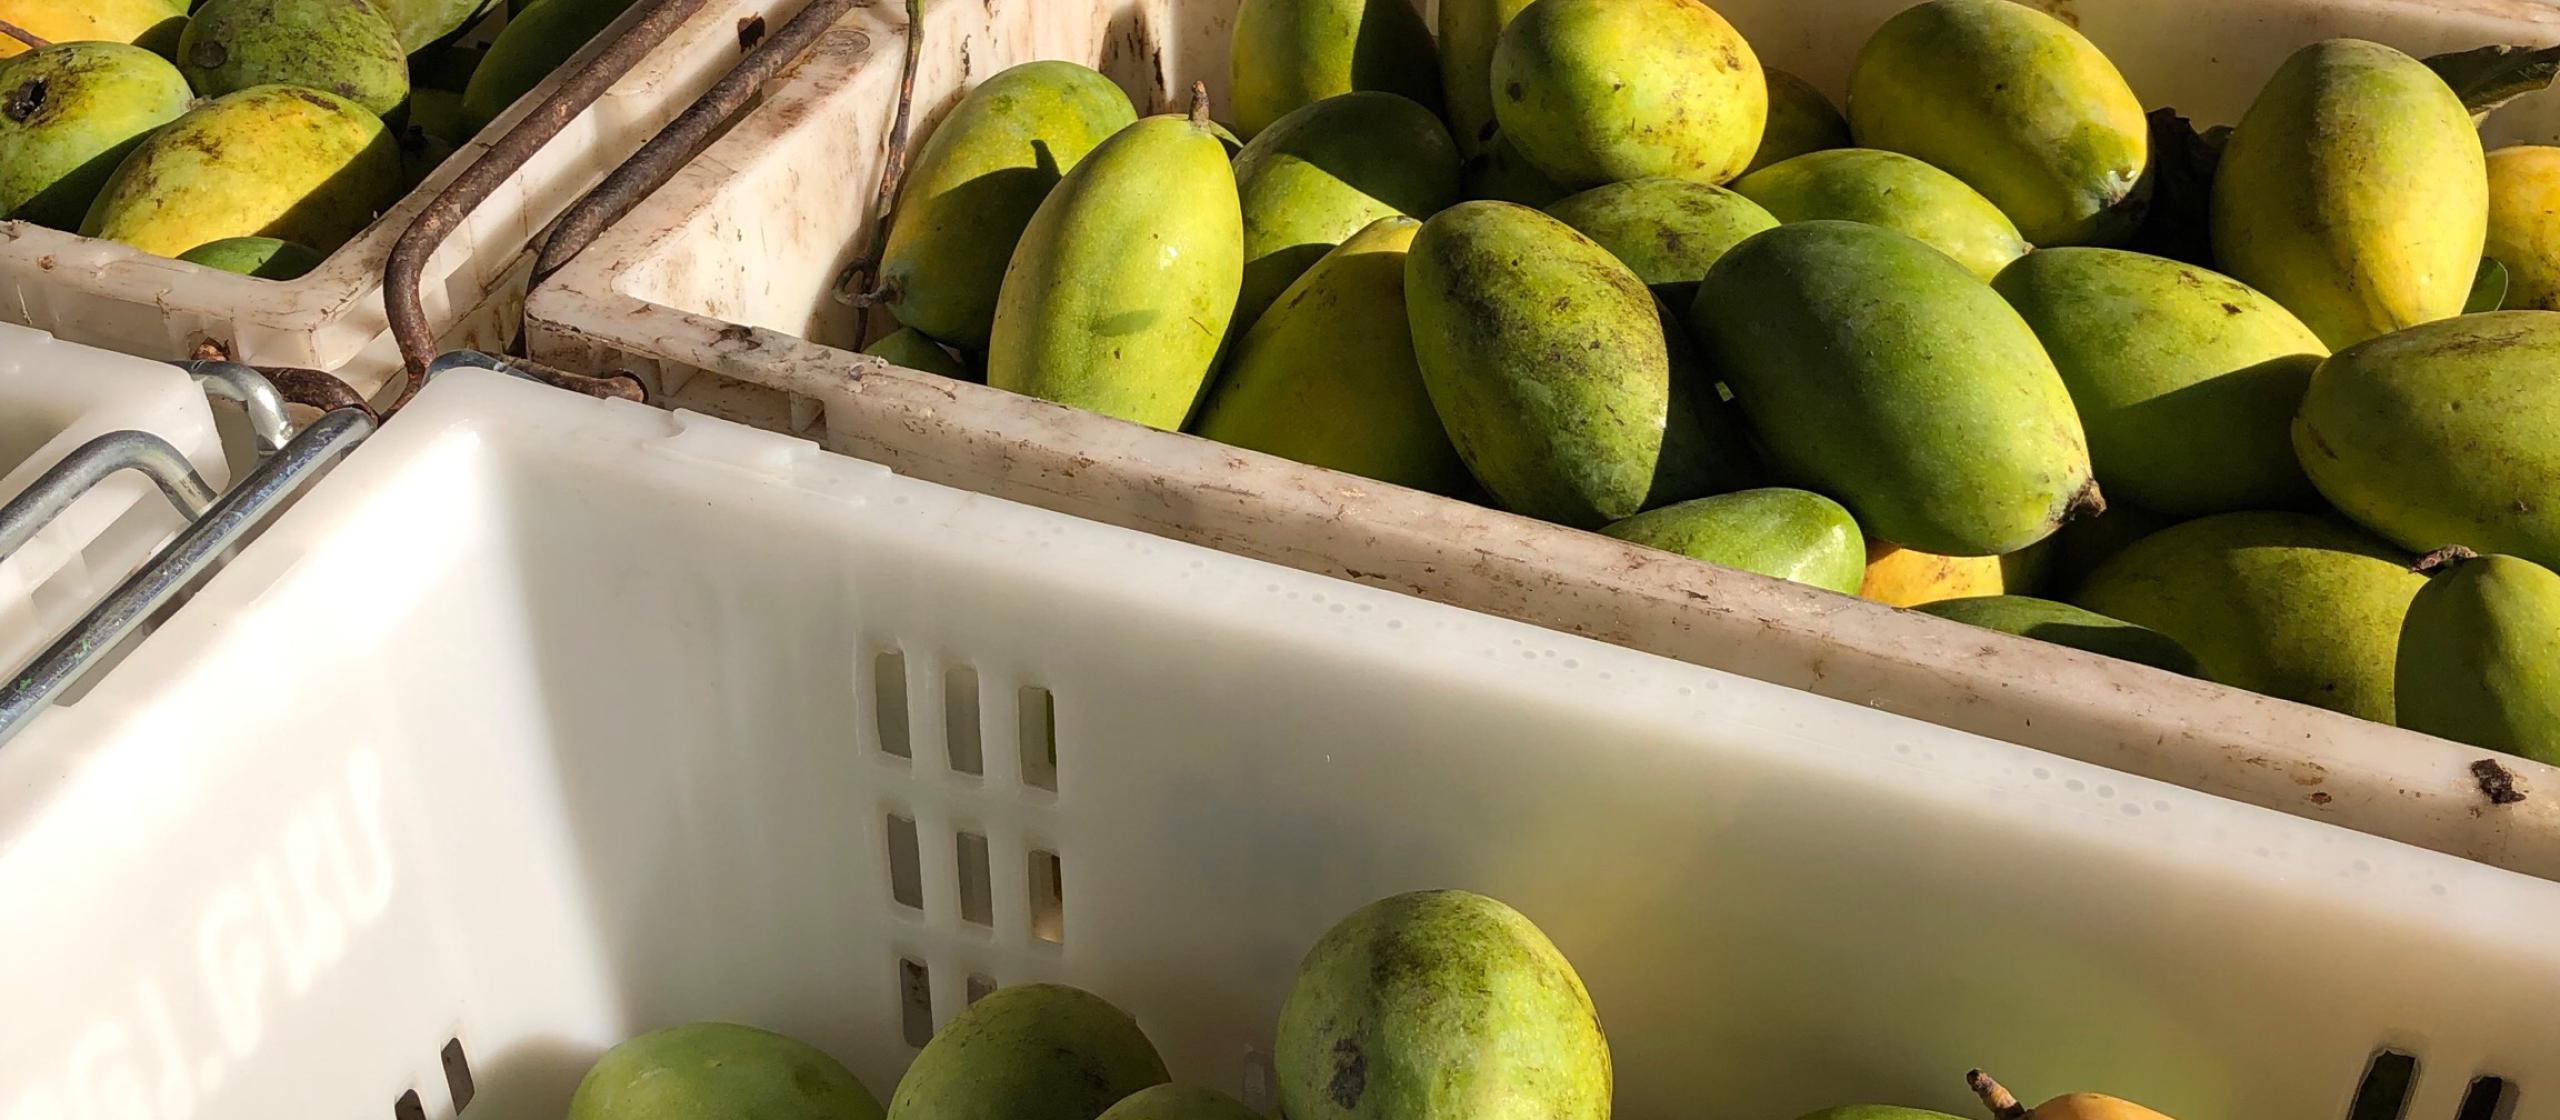 Mangoes being shipped